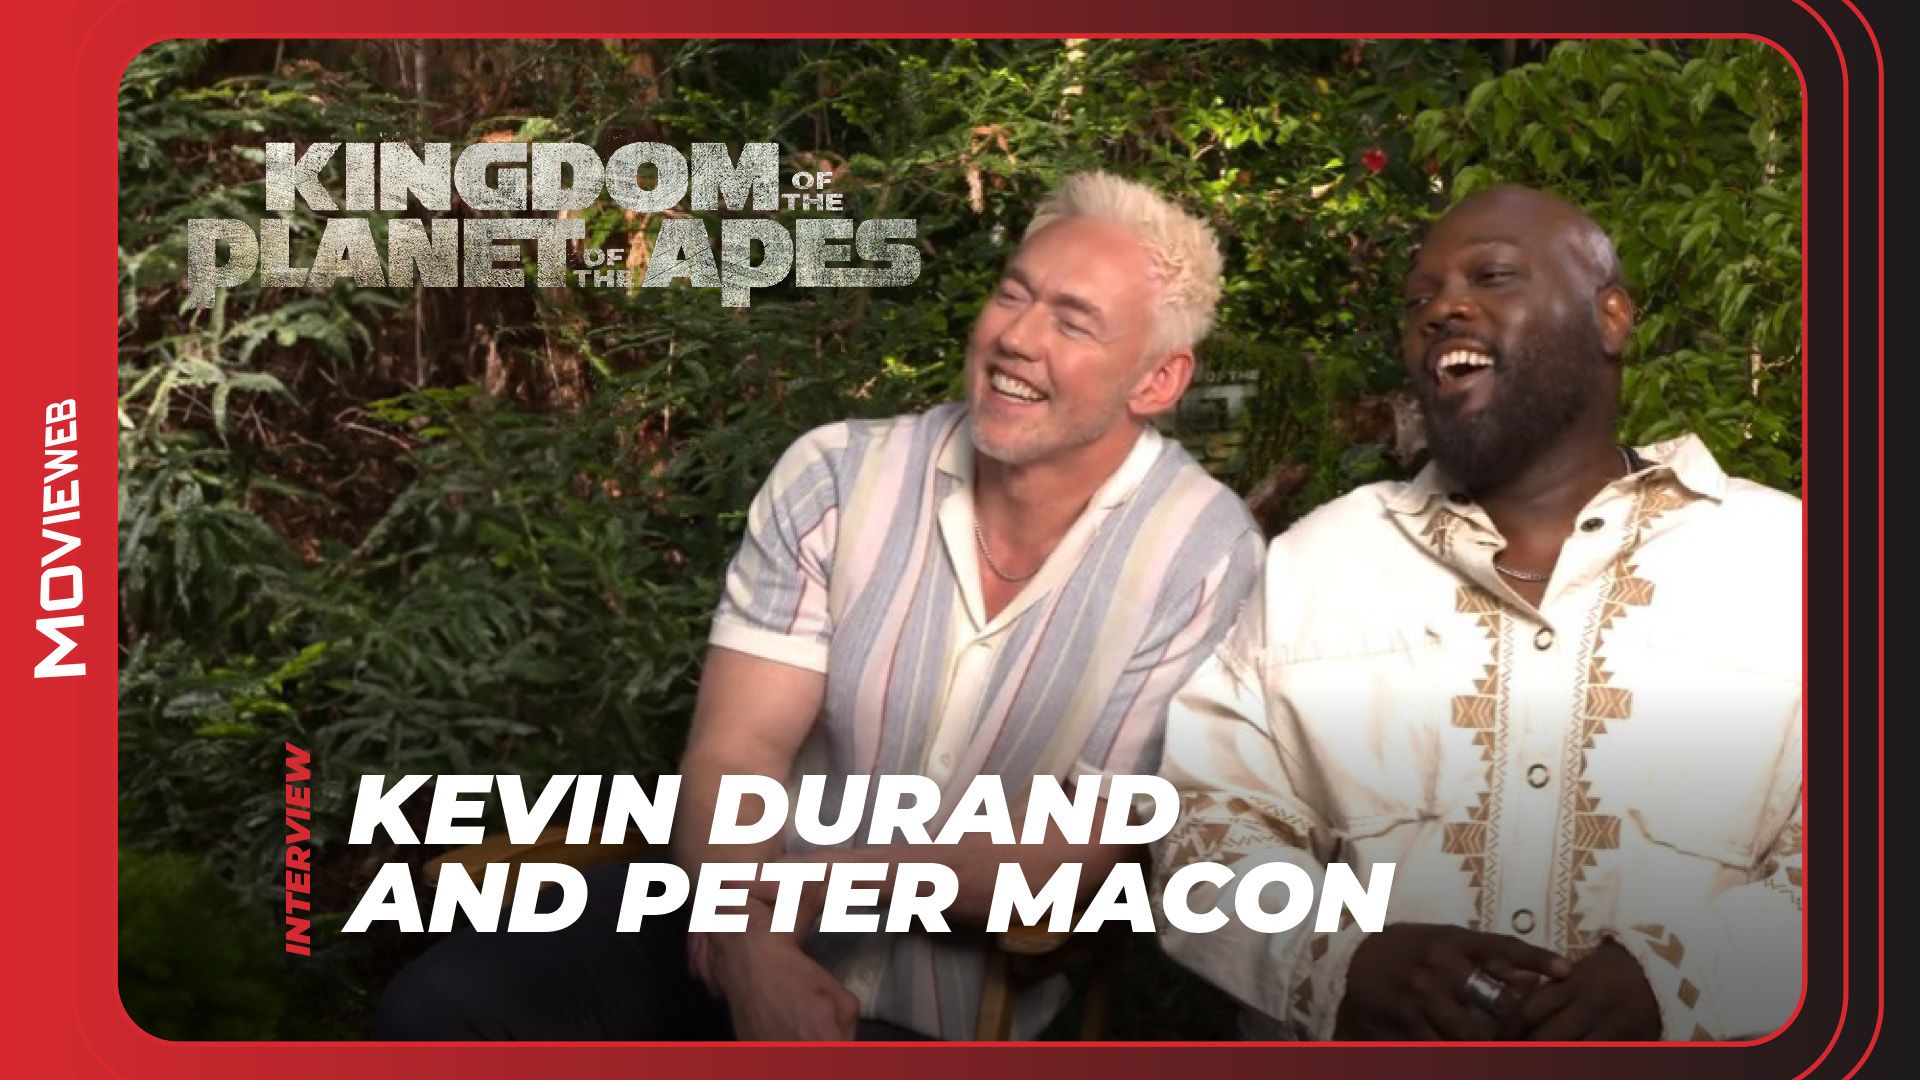 Kingdom of the Planet of the Apes - Kevin Durand and Peter Macon